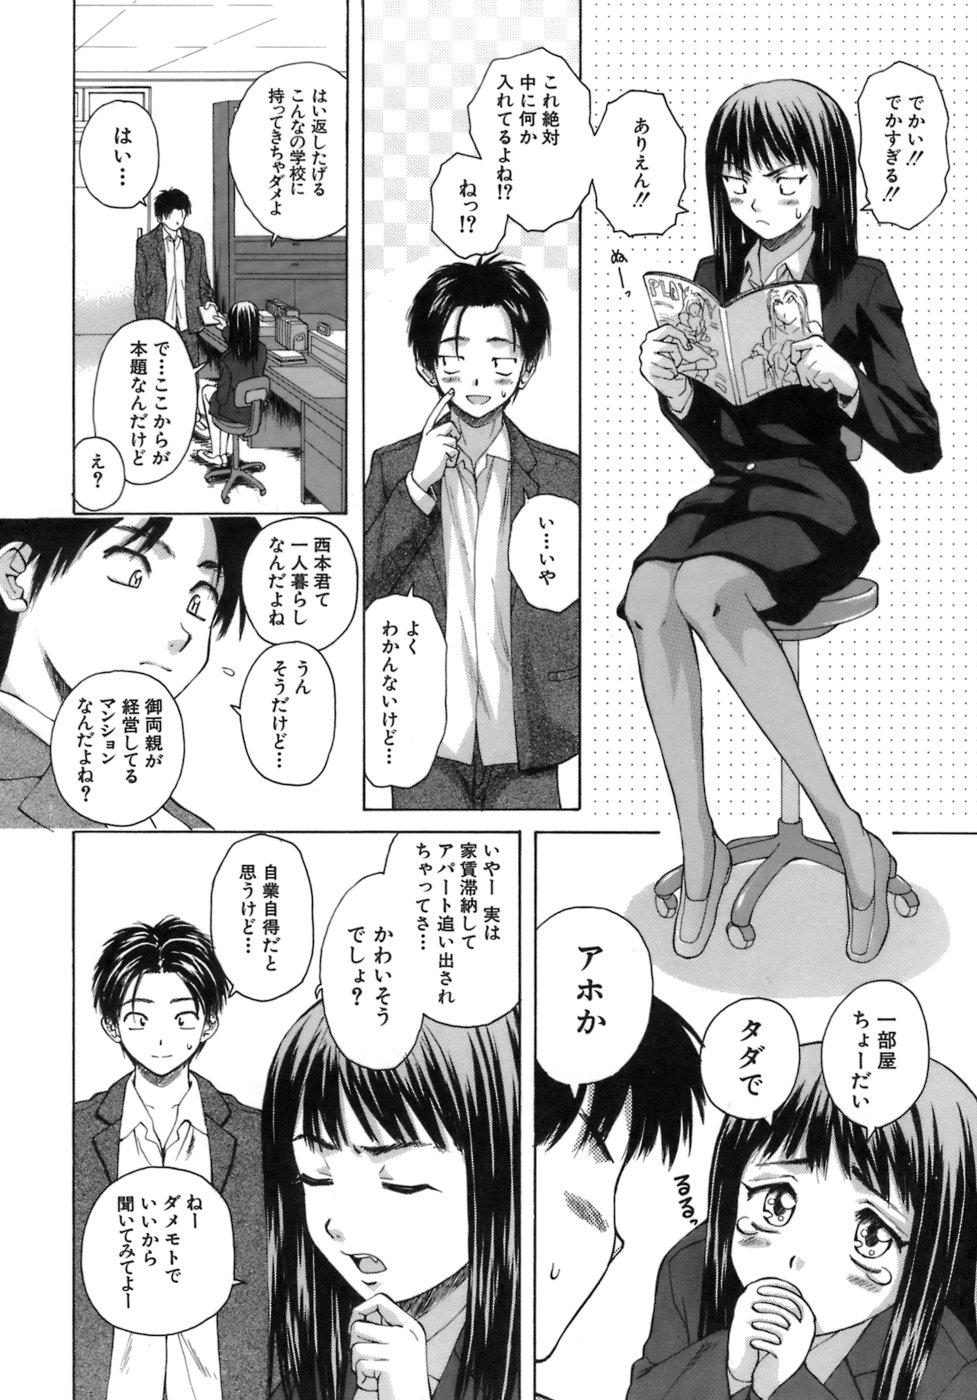 Hardcorend Kyoushi to Seito to - Teacher and Student Consolo - Page 7